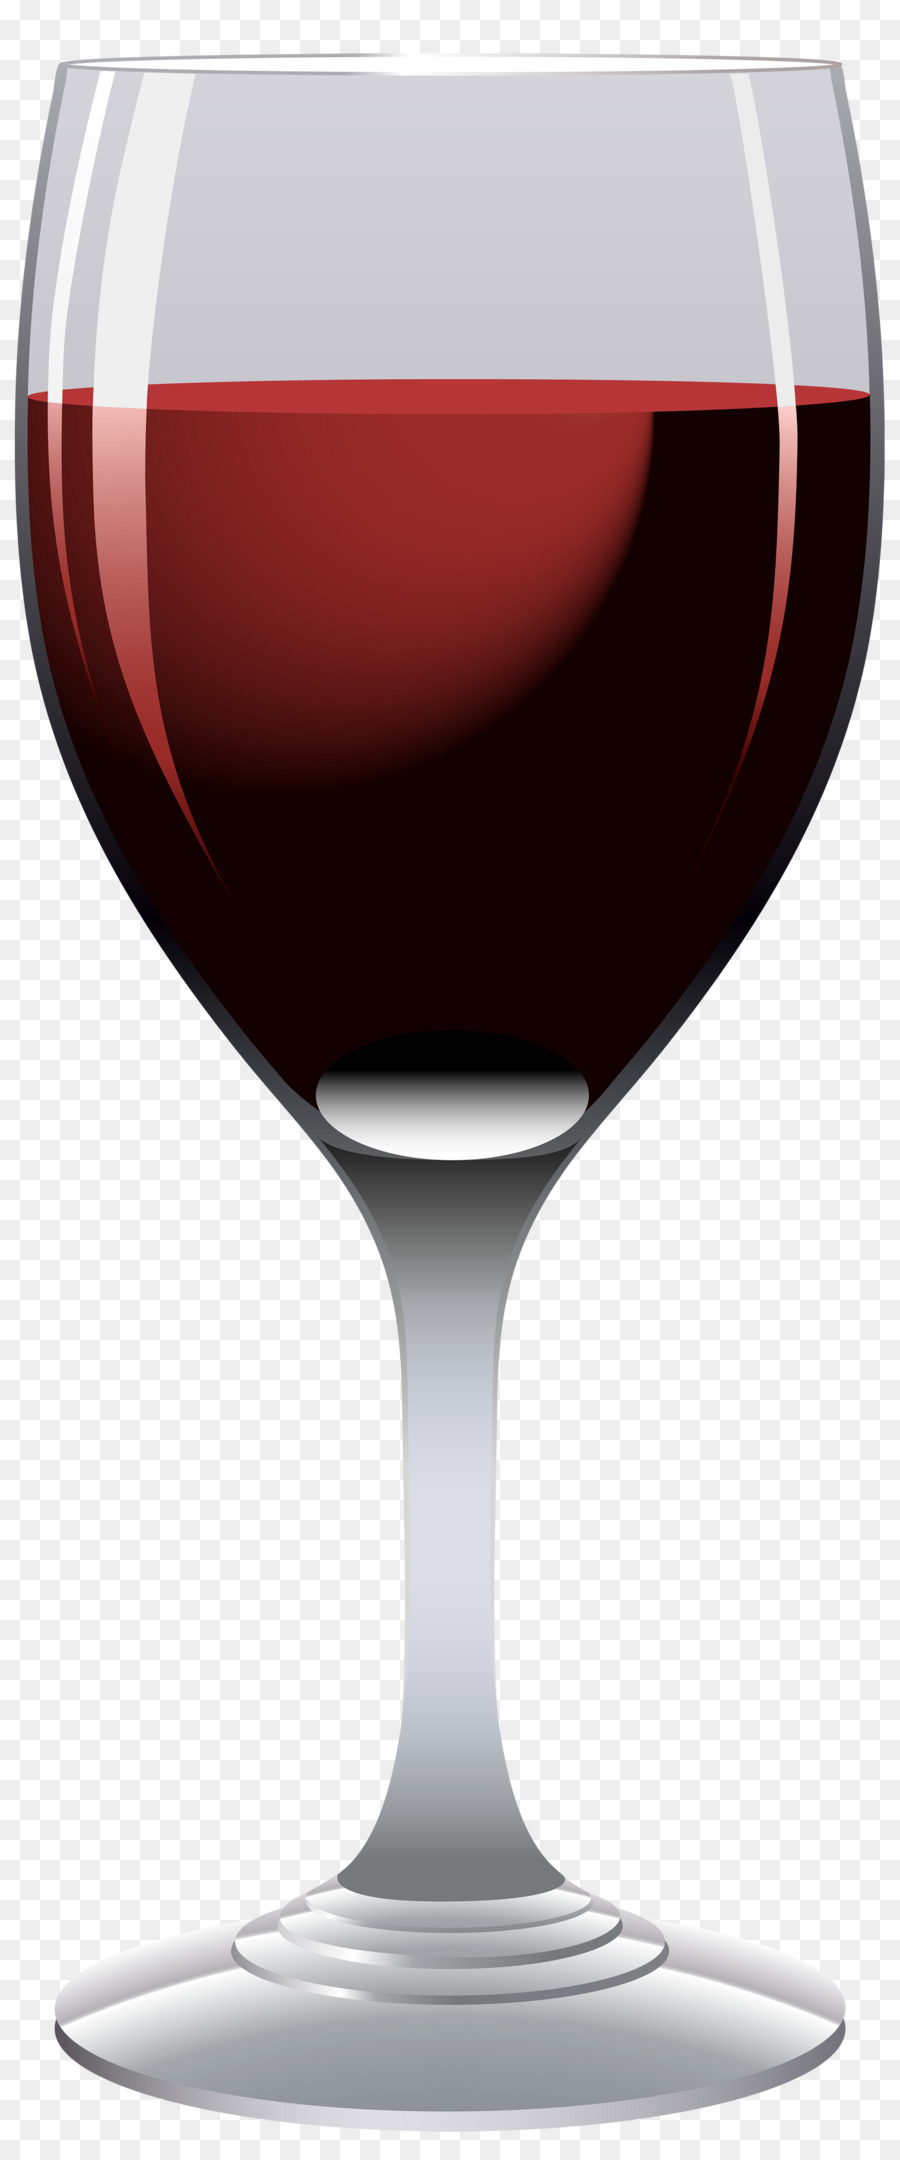 Red Wine Wine glass Clip art - Wine Goblet Cliparts png download - 1883*4500 - Free Transparent Red Wine png Download.